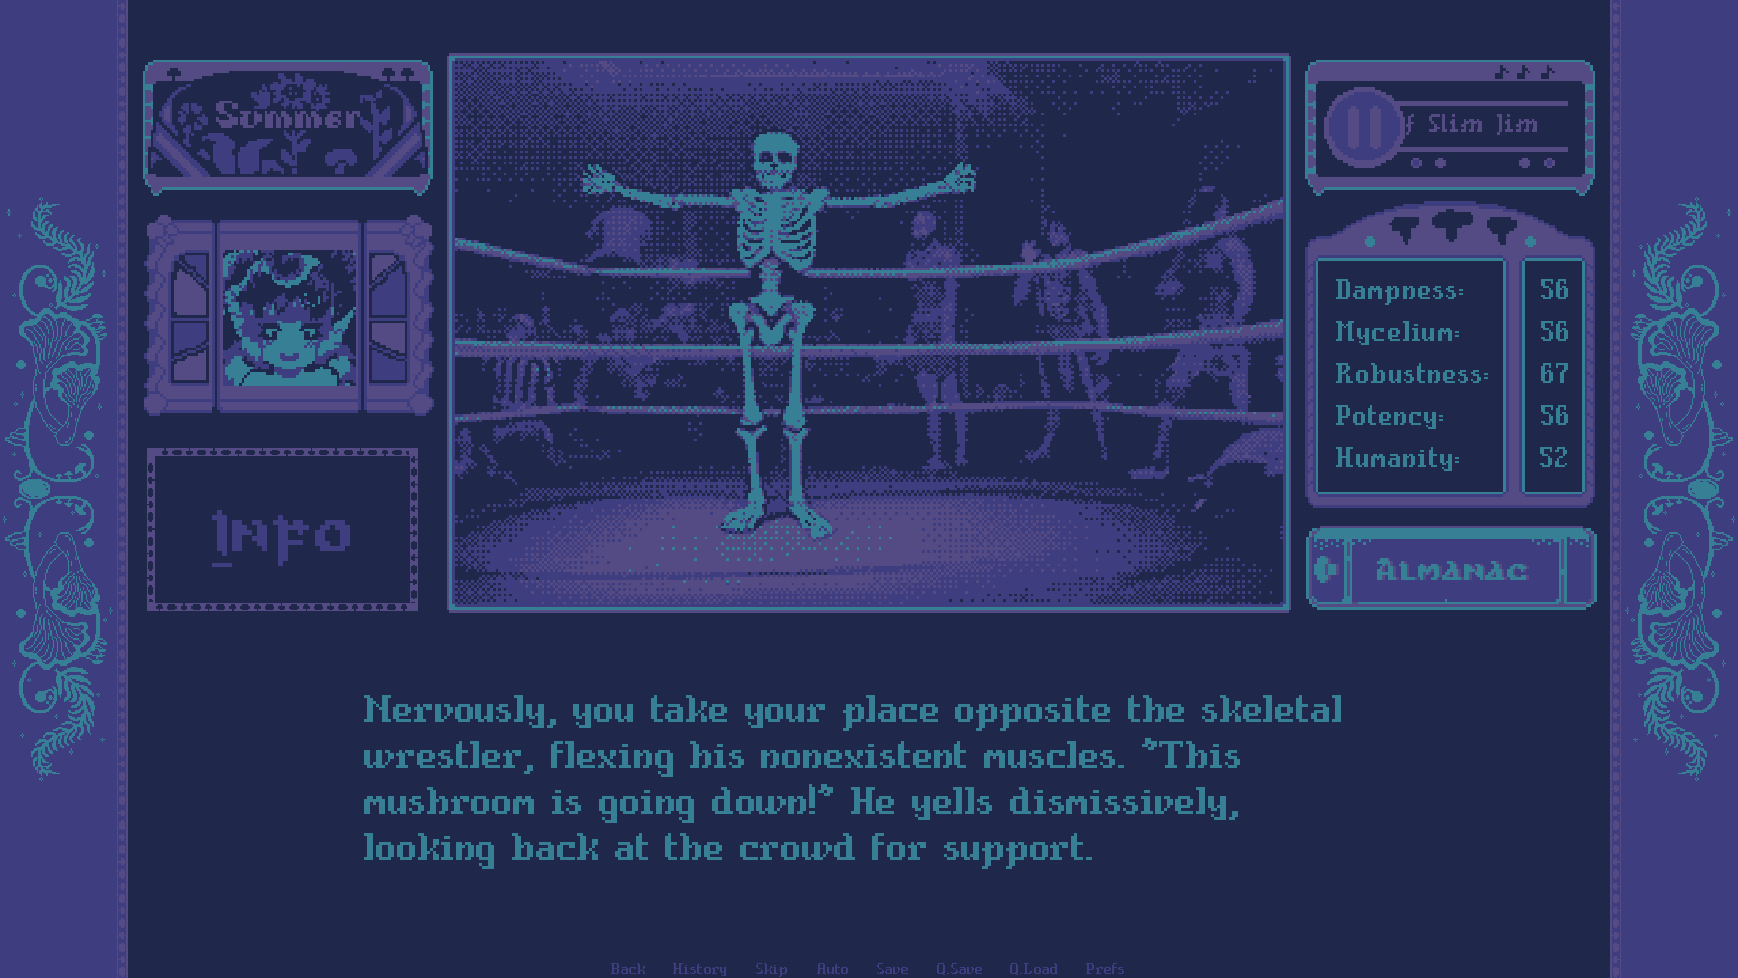 A visual novel window. It portrays a skeleton making a 'come at me' pose to showboat to the crowd behind him. The dialogue box says: 'Nervously, you take your place opposite the skeletal wrestler, flexing his nonexistent muscles. This mushroom is going down! He yells dismissively, looking back at the crowd for support.'